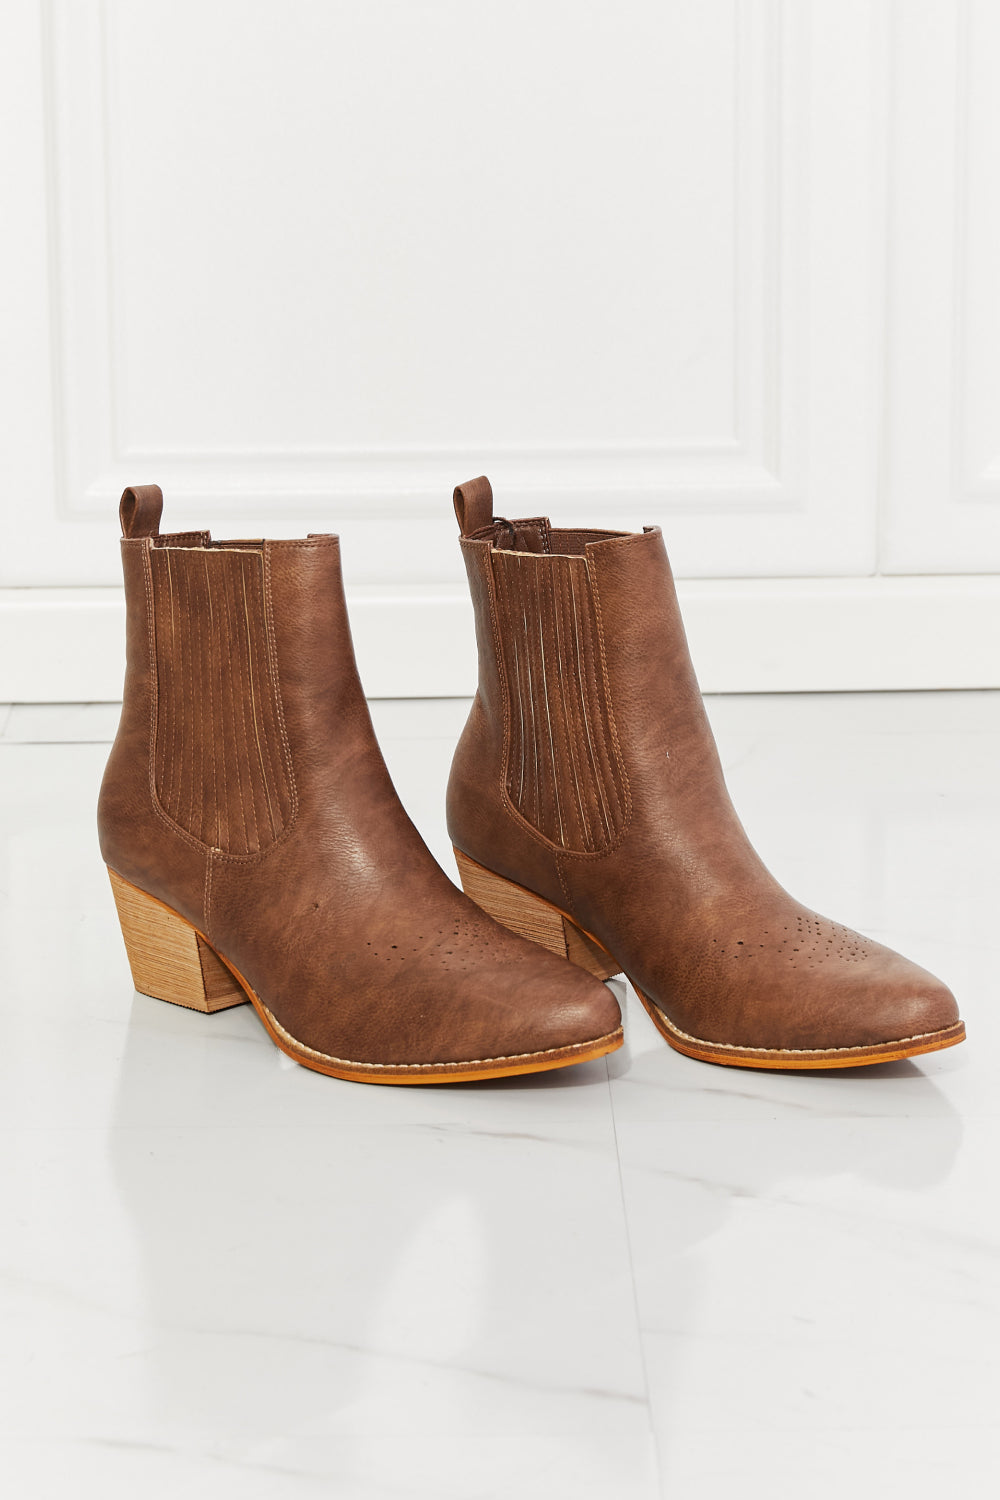 MMShoes Love the Journey Stacked Heel Chelsea Boot in Chestnut - BEAUTY COSMOTICS SHOP